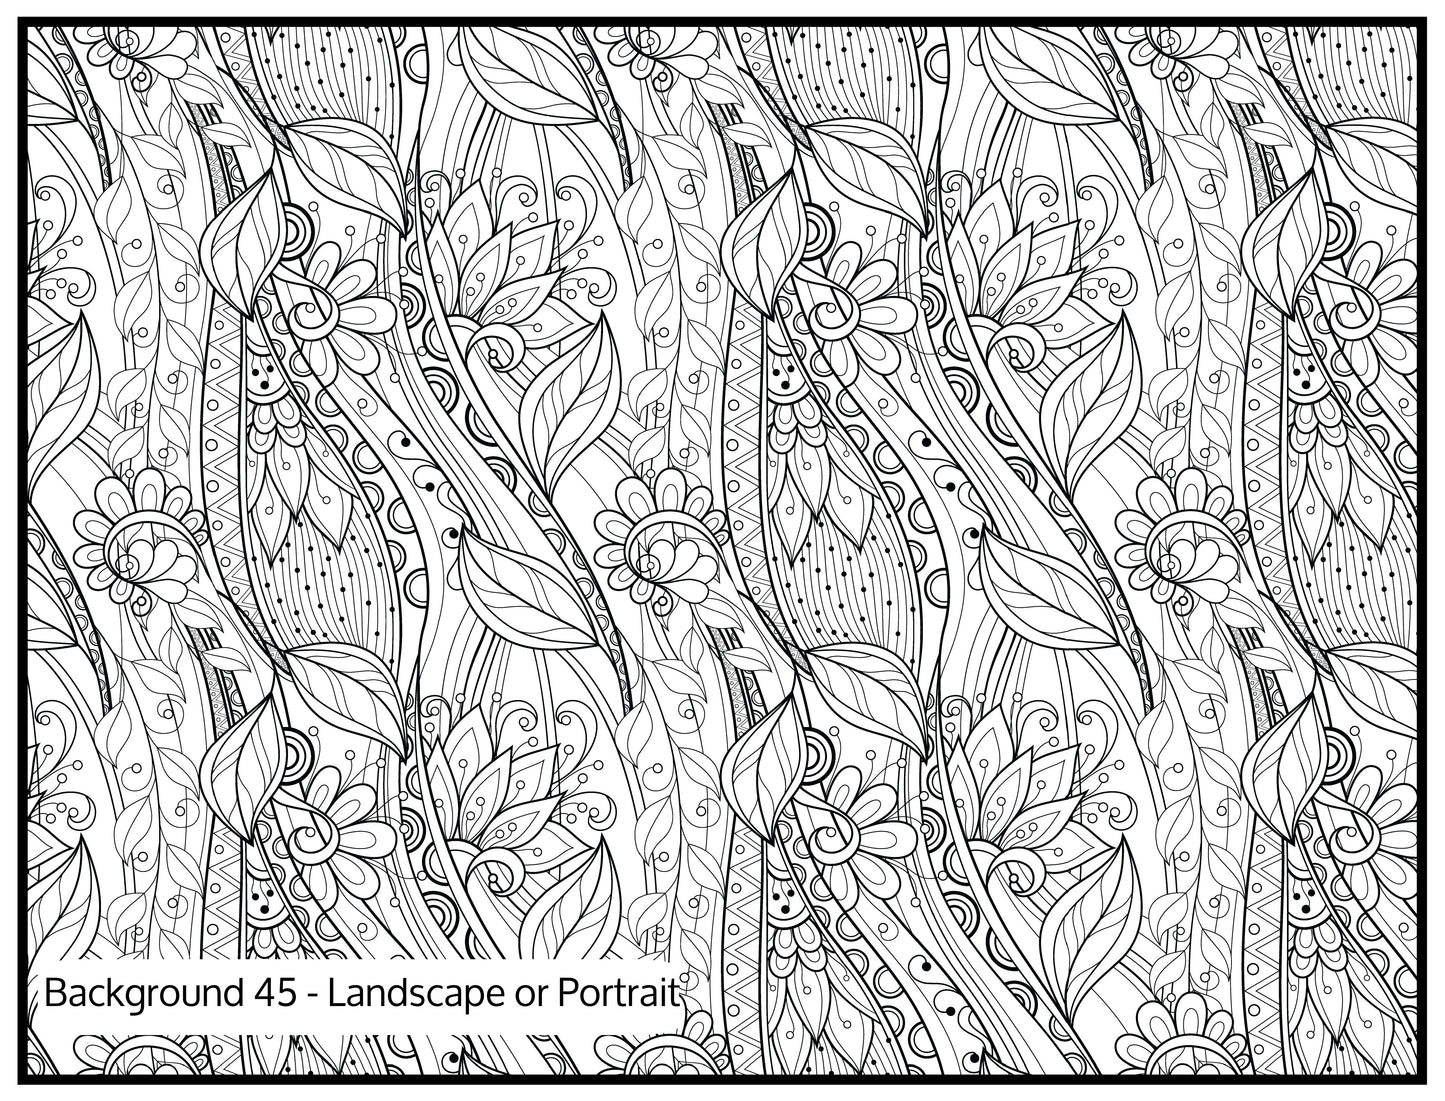 Background 45 Custom Personalized Giant Coloring Poster 46"x60"